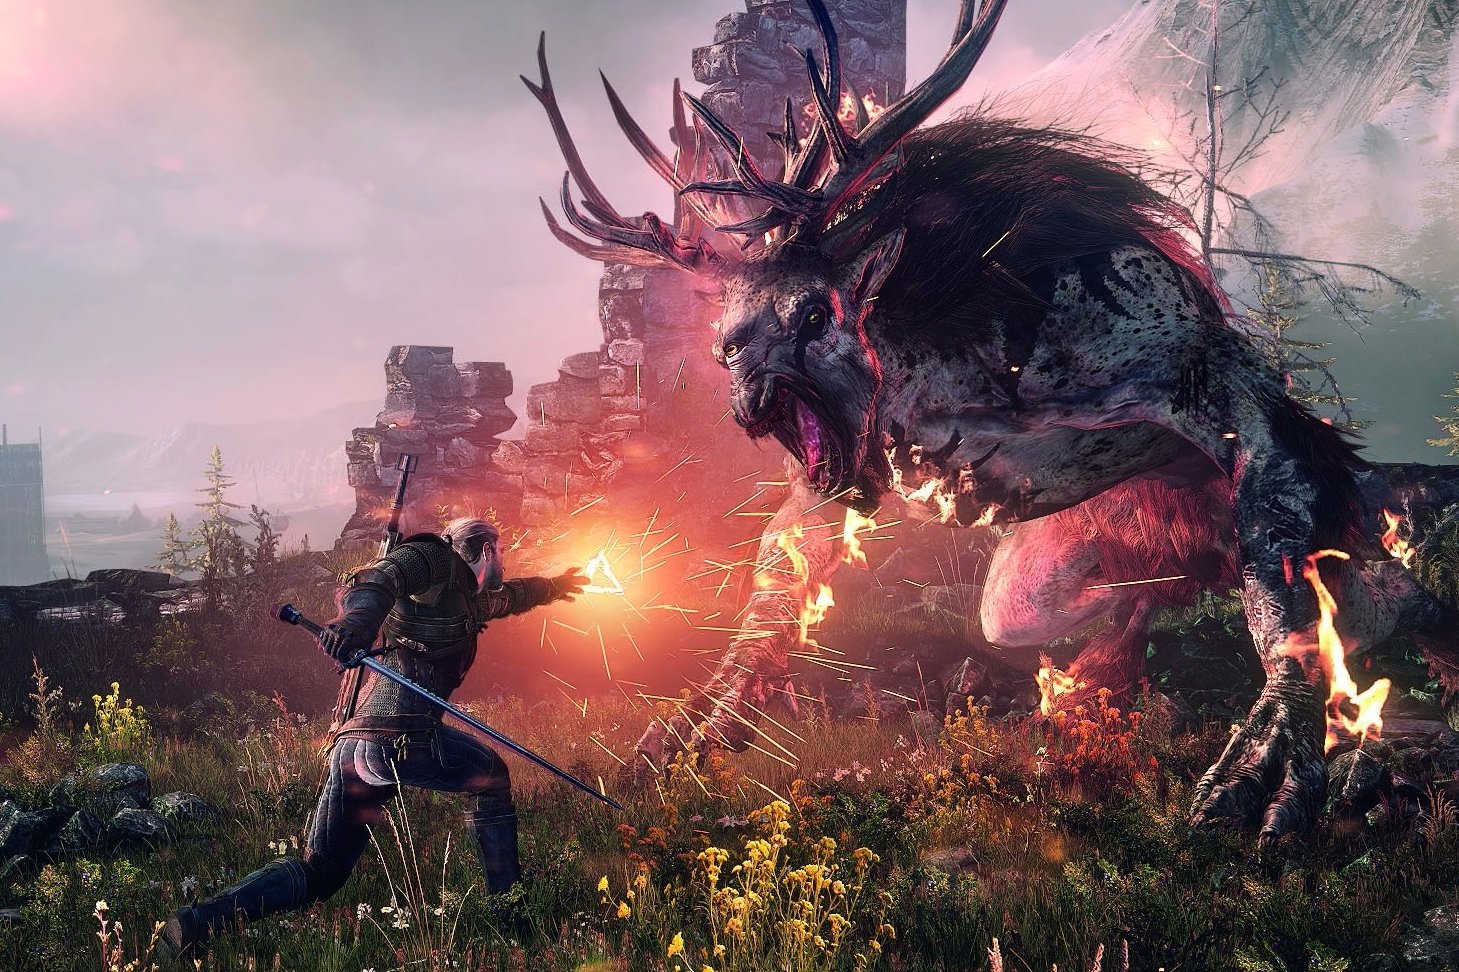 witcher 3 cheat codes pc for gold